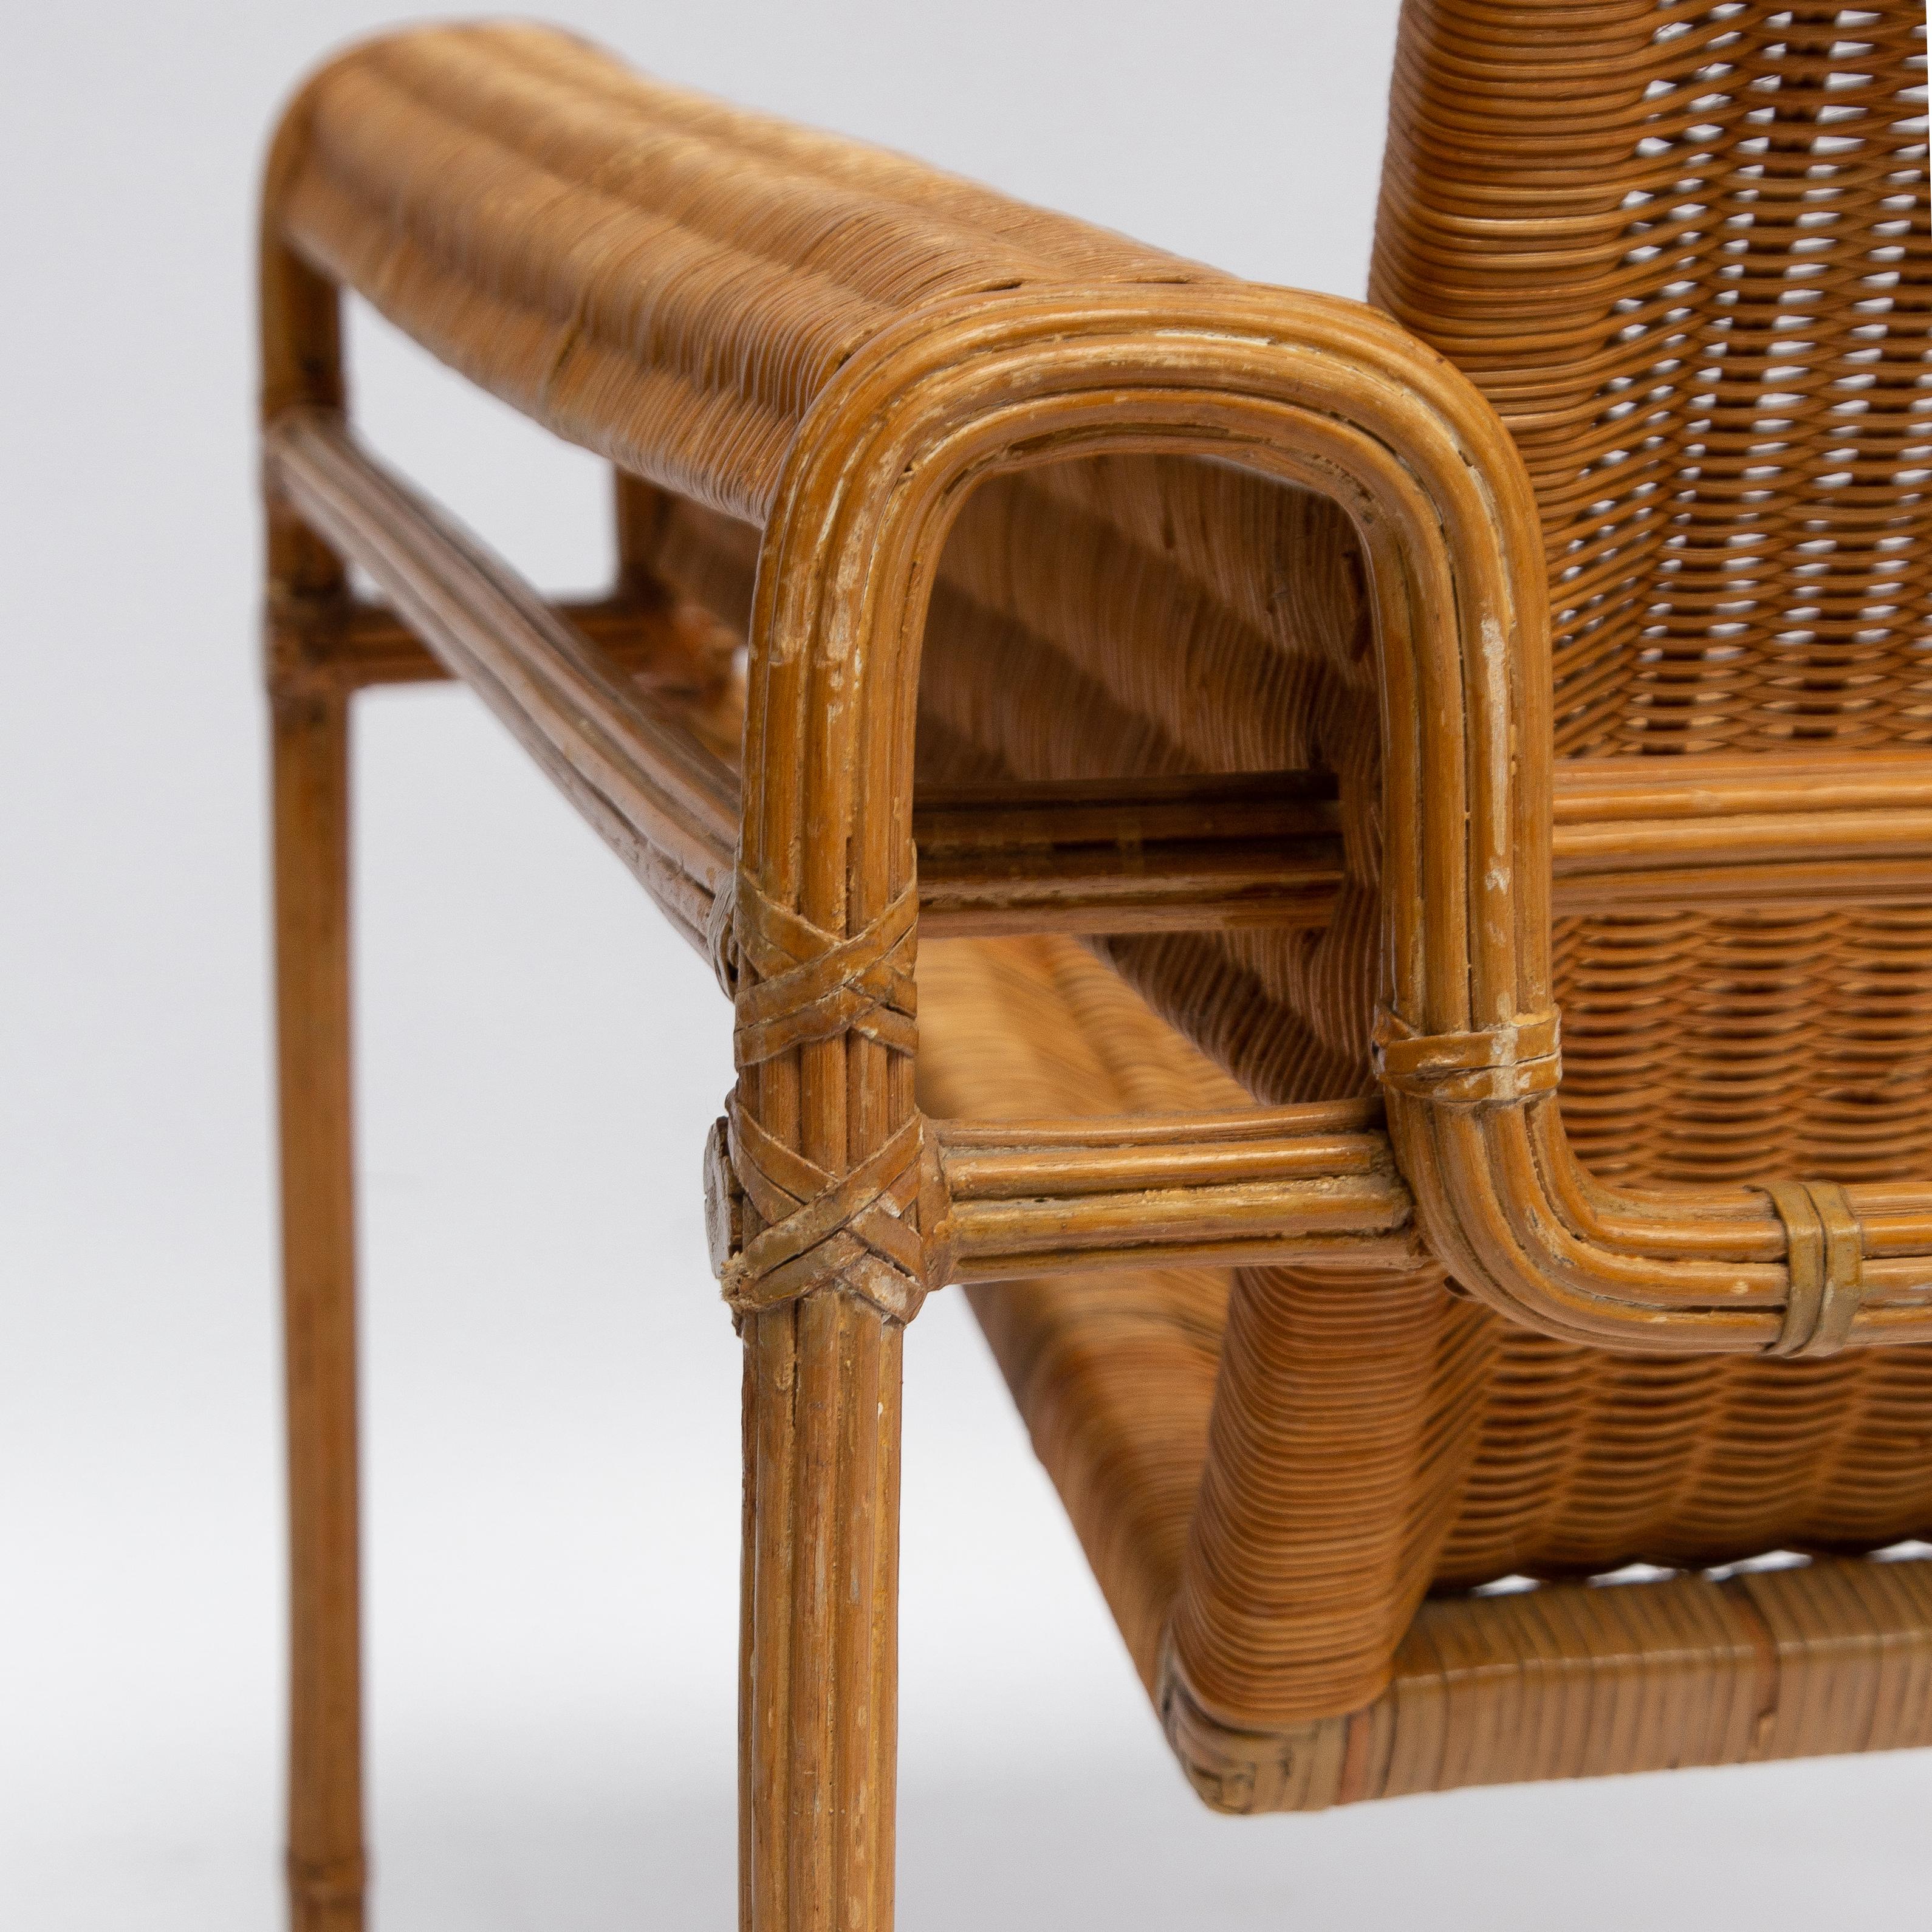 Bauhaus Wicker Chair, Inspired by Marcel Breuer's Wassily Chair, 1970s